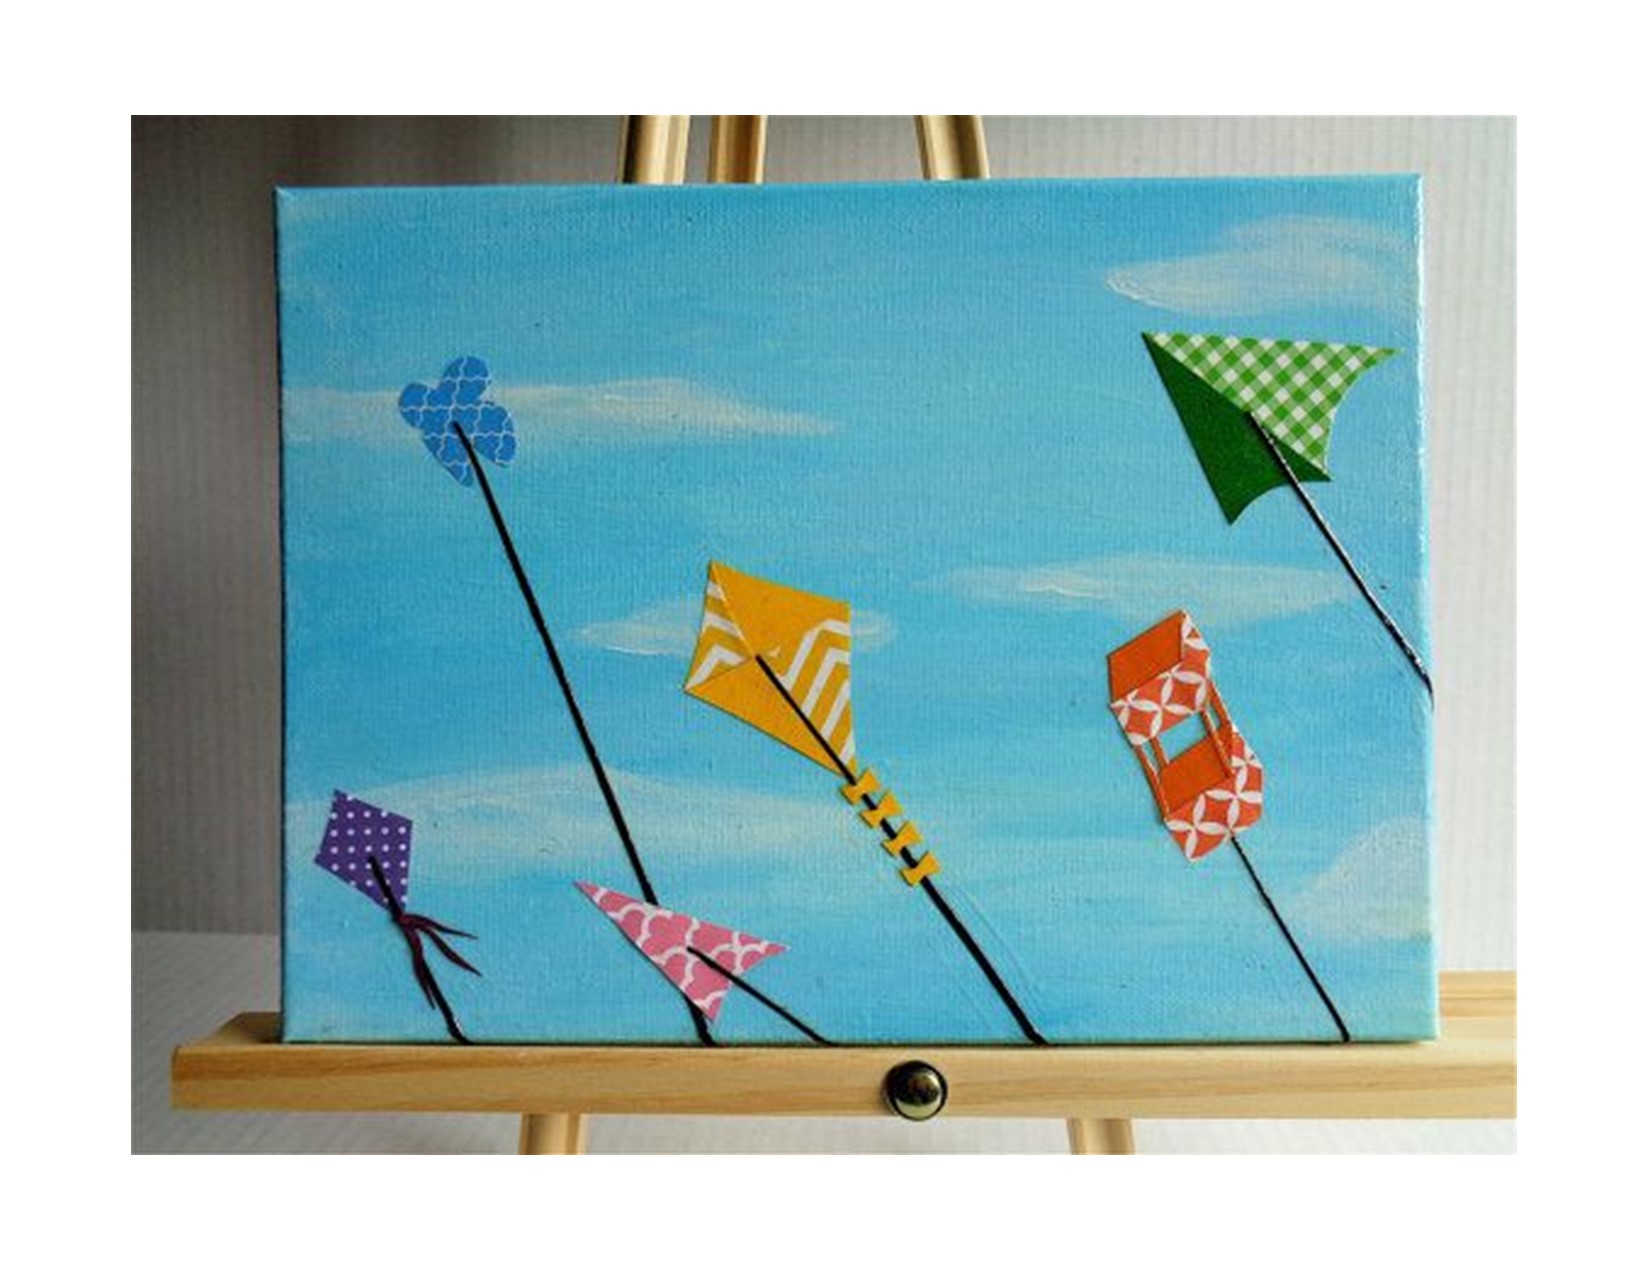 Acrylic painting of sky and kites